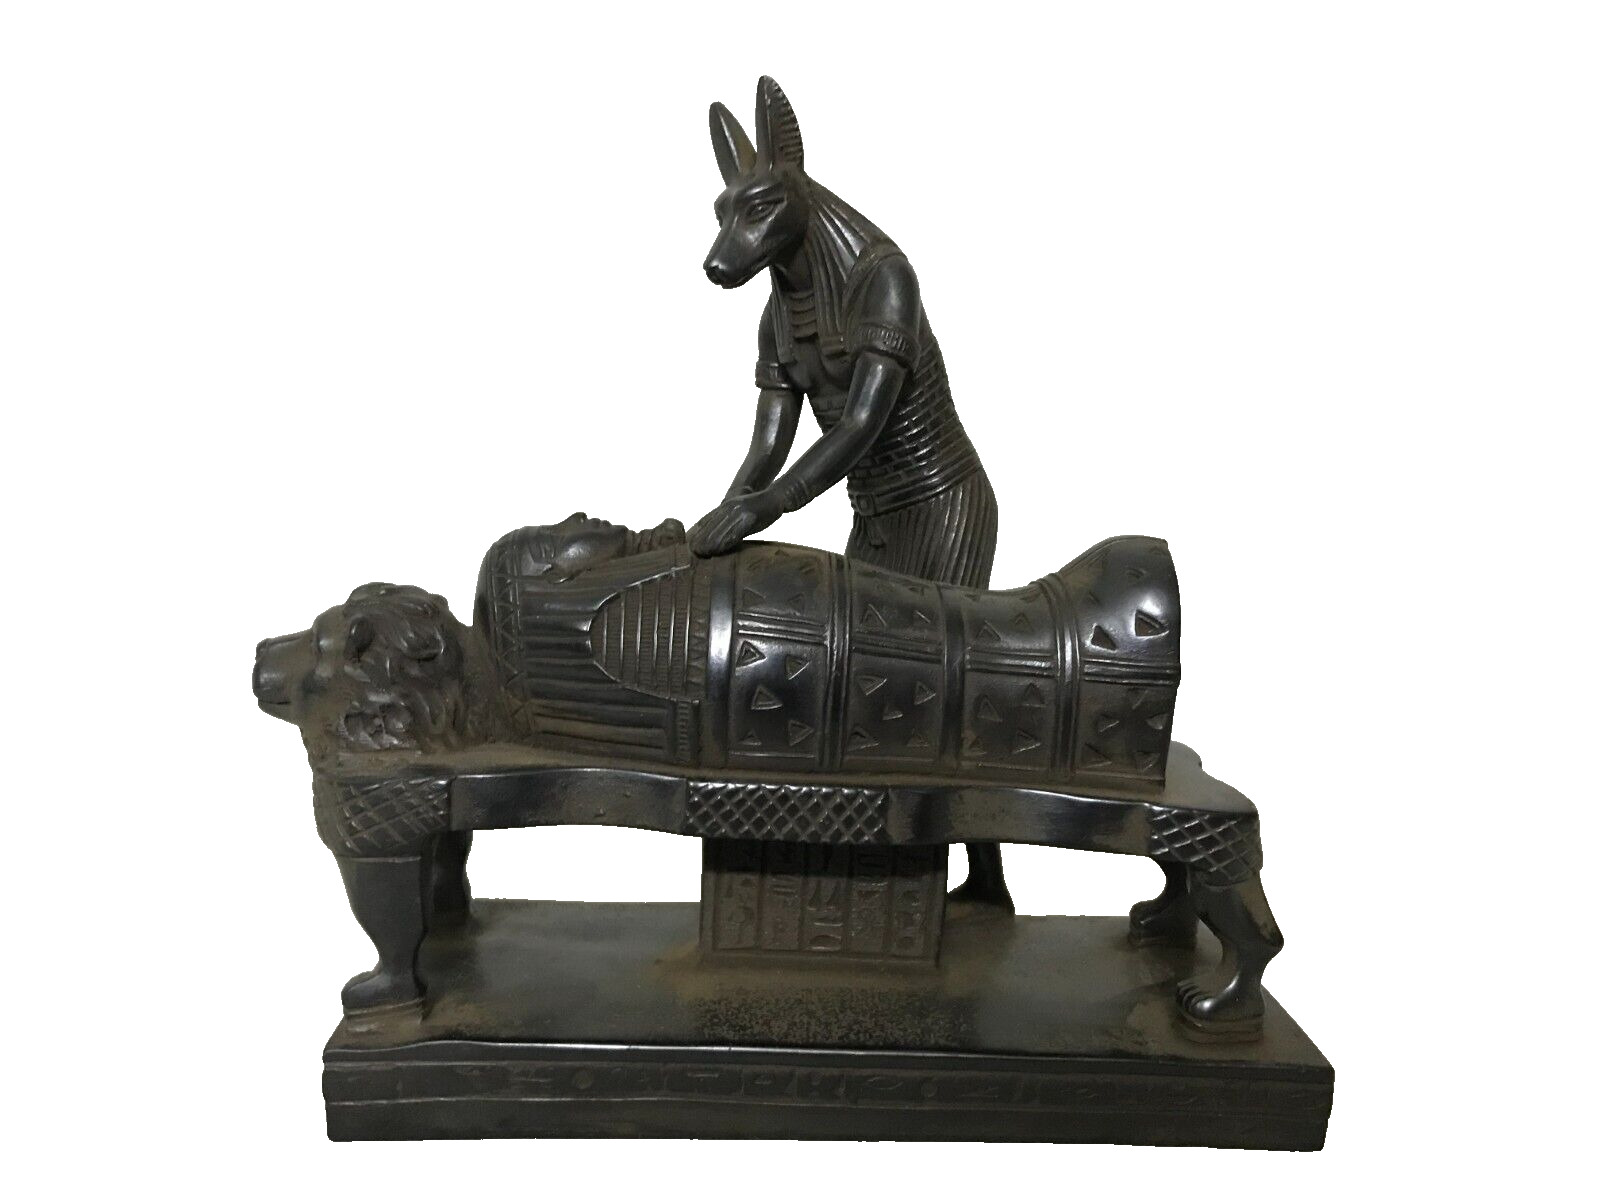 A rare statue of the ancient god Anubis mummifying the dead for the afterlife